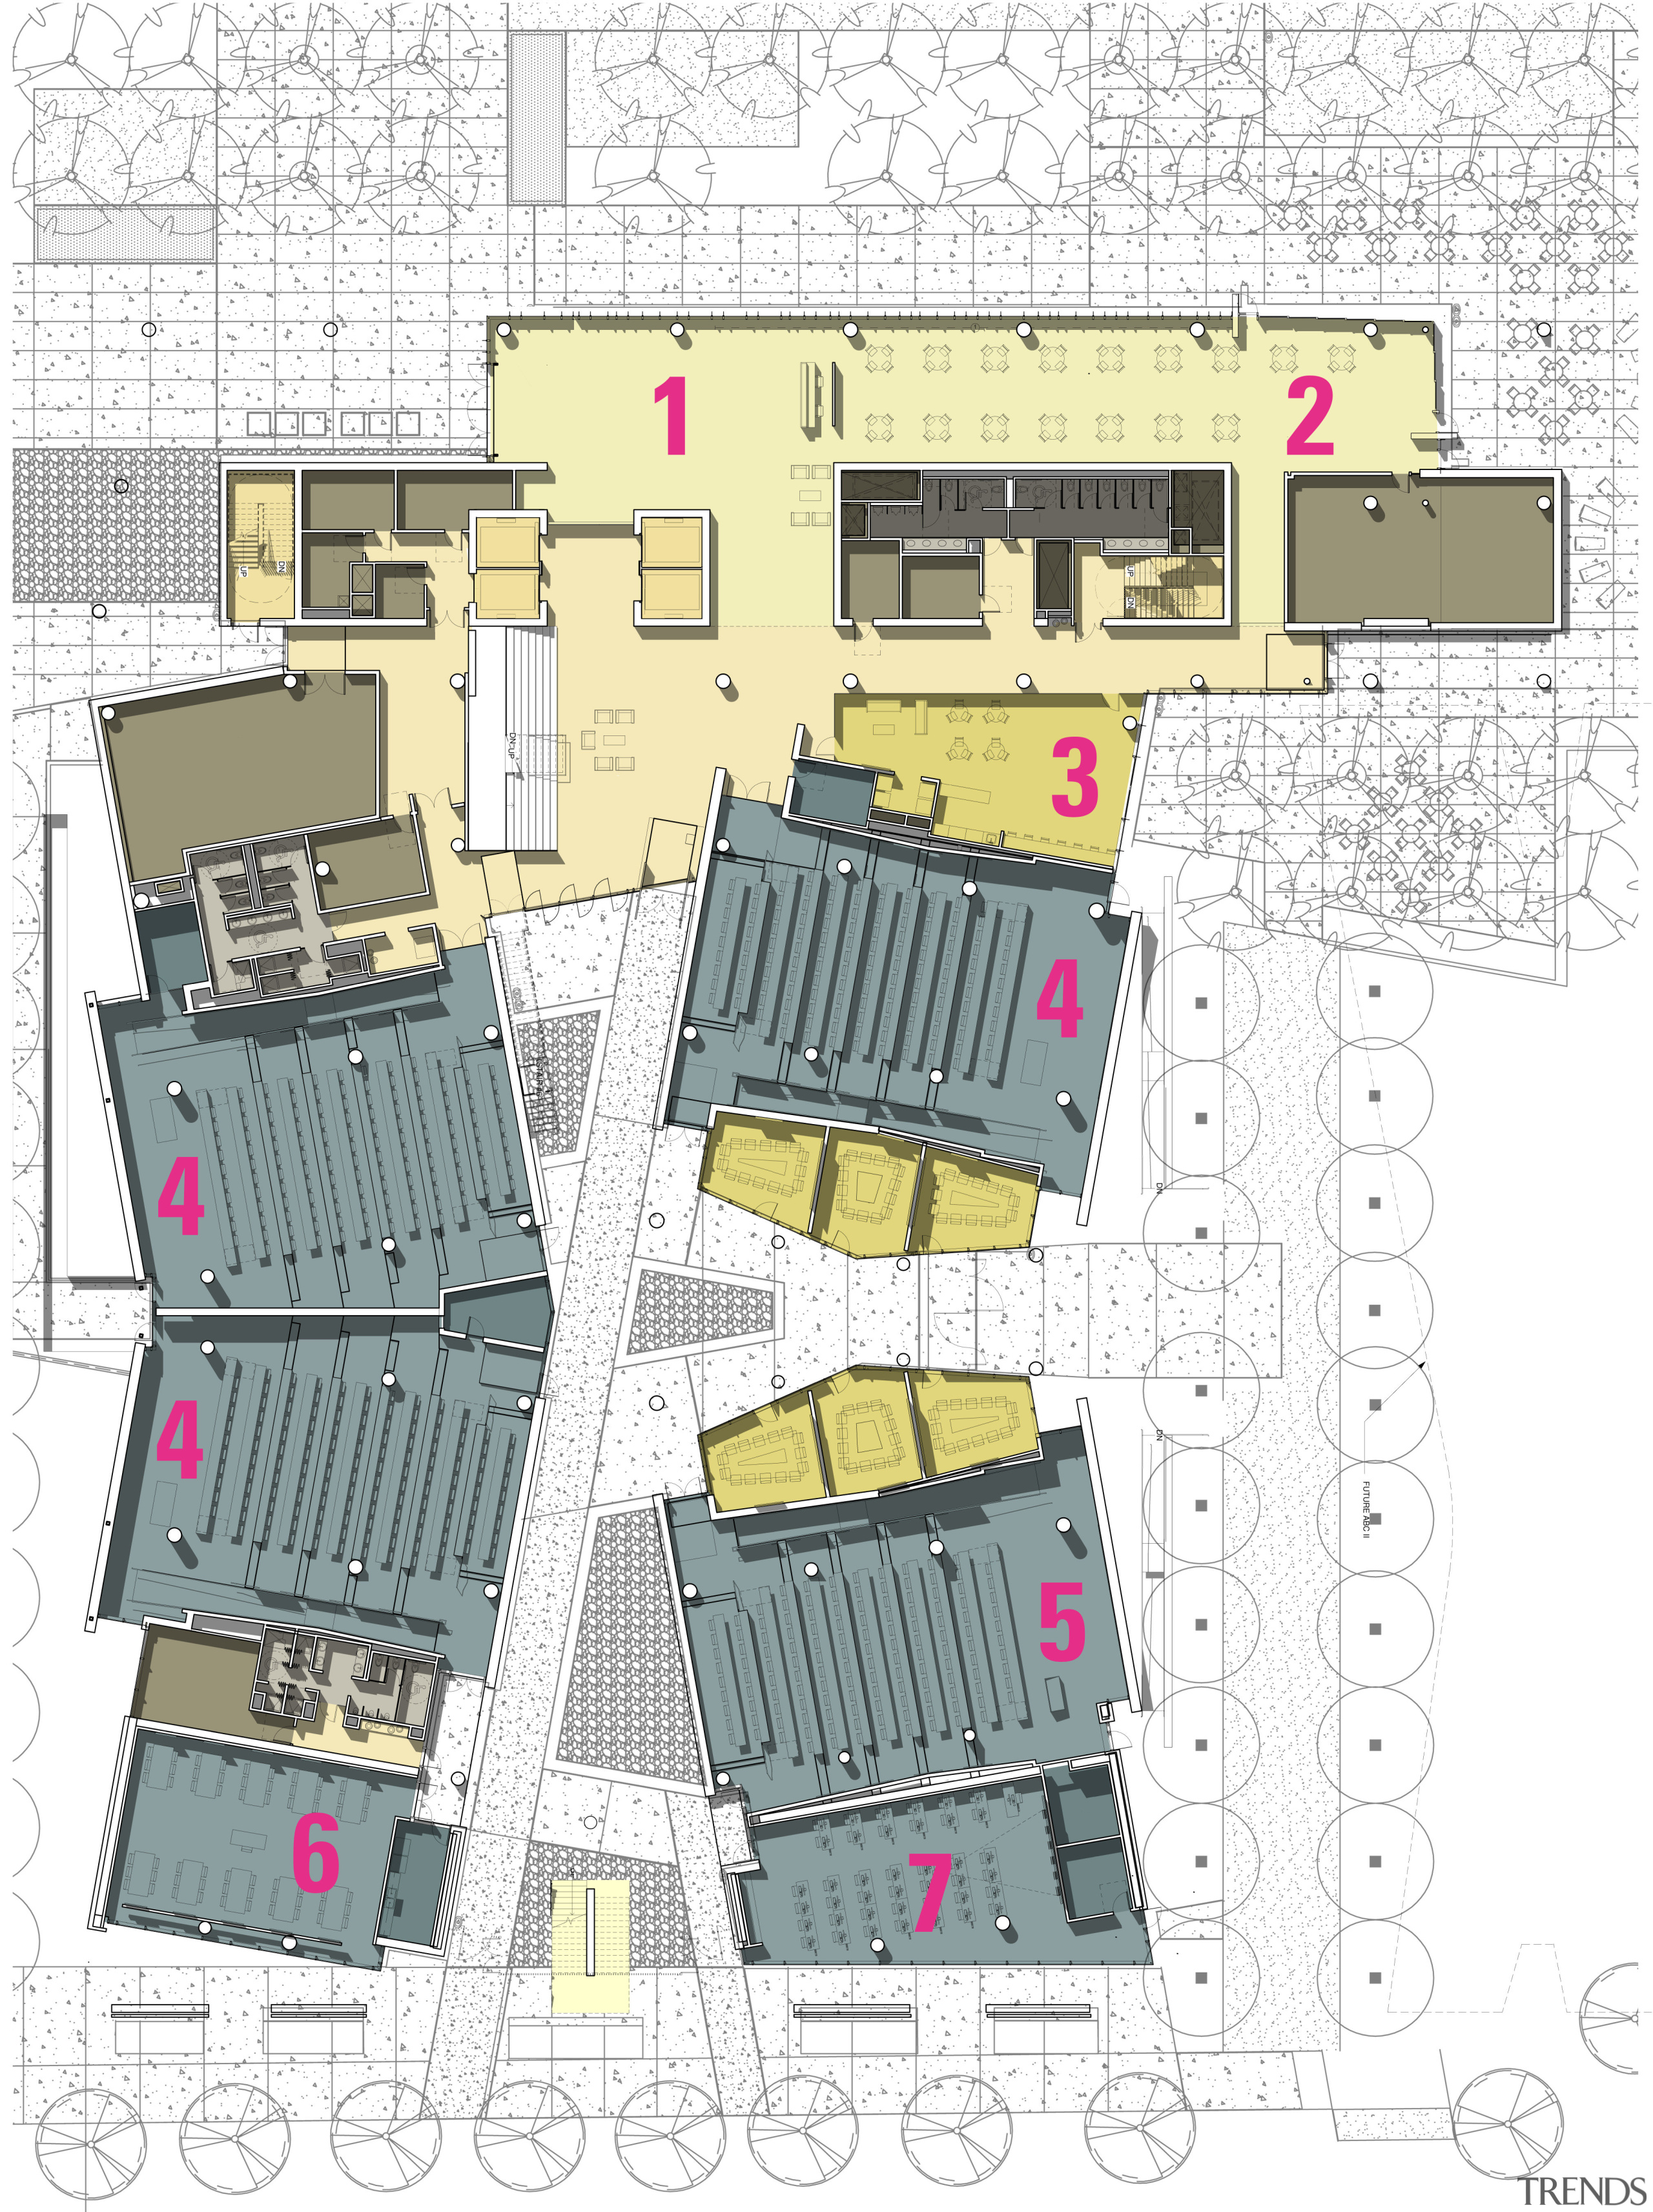 1 lobby, 2 cafeteria, 3 student lounge, 4 area, design, floor plan, line, plan, product, product design, white